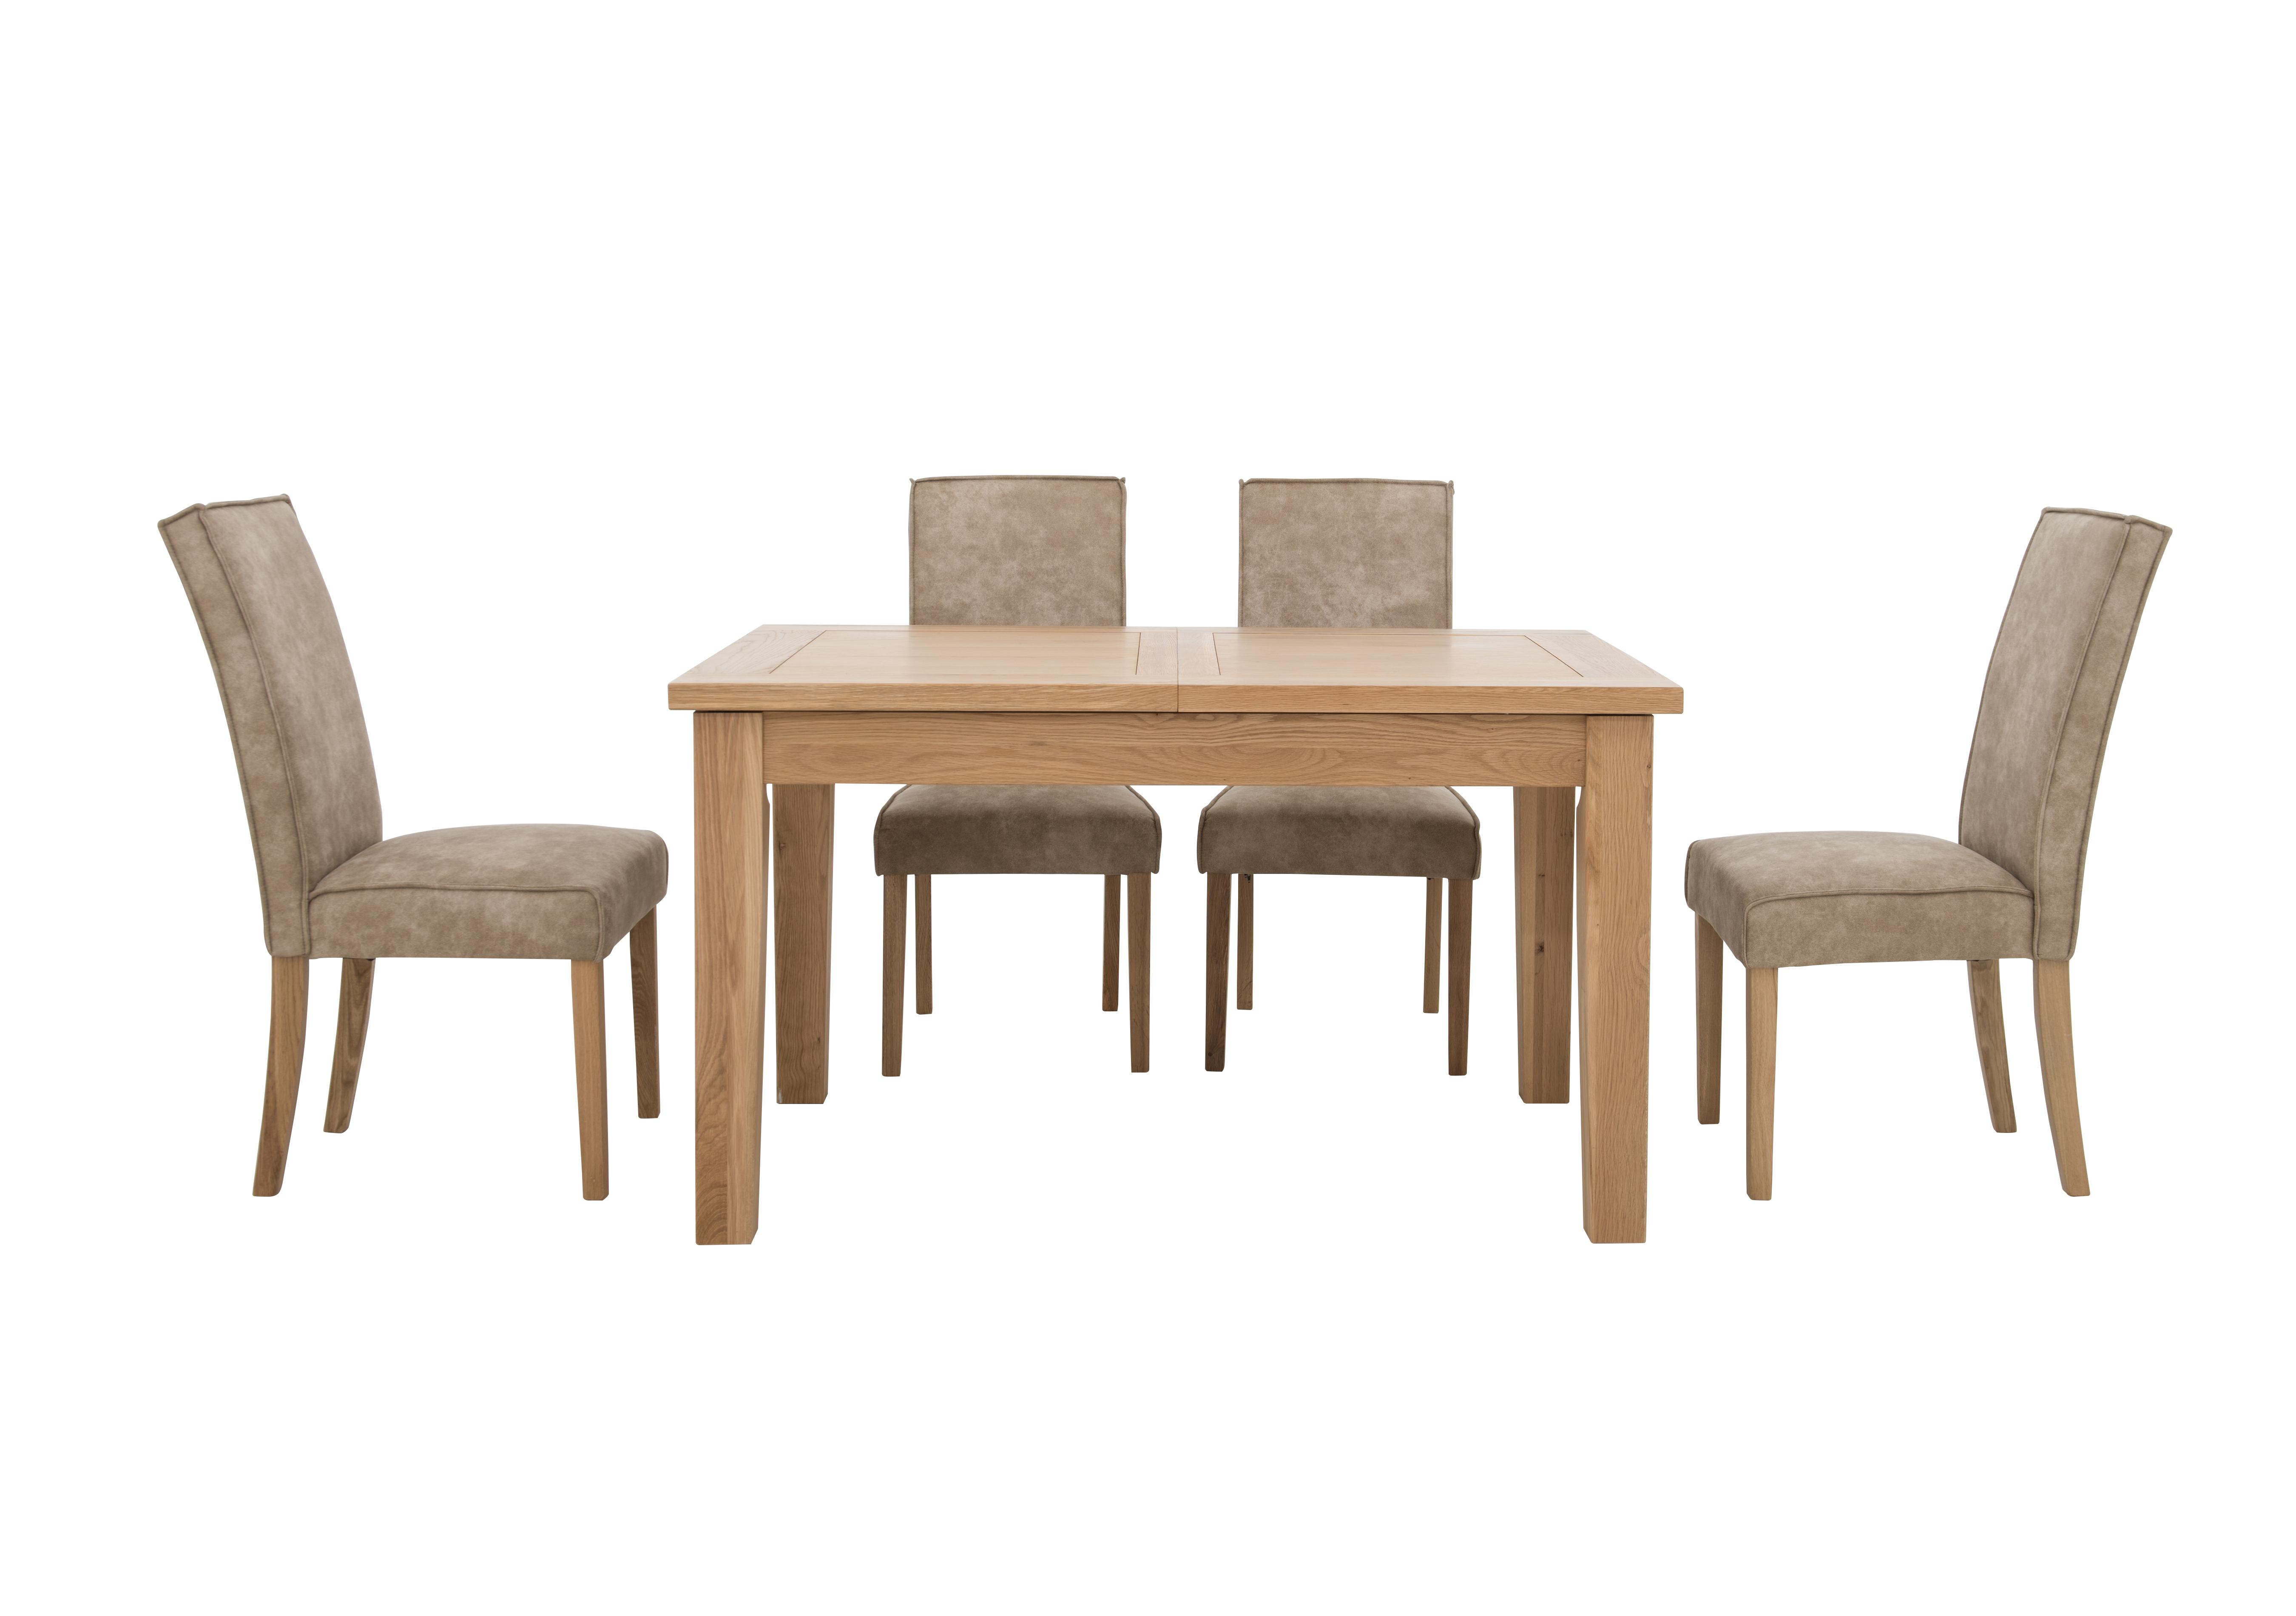 California Rectangular Solid Oak Extending Dining Table and 4 Faux Suede Chairs in  on Furniture Village